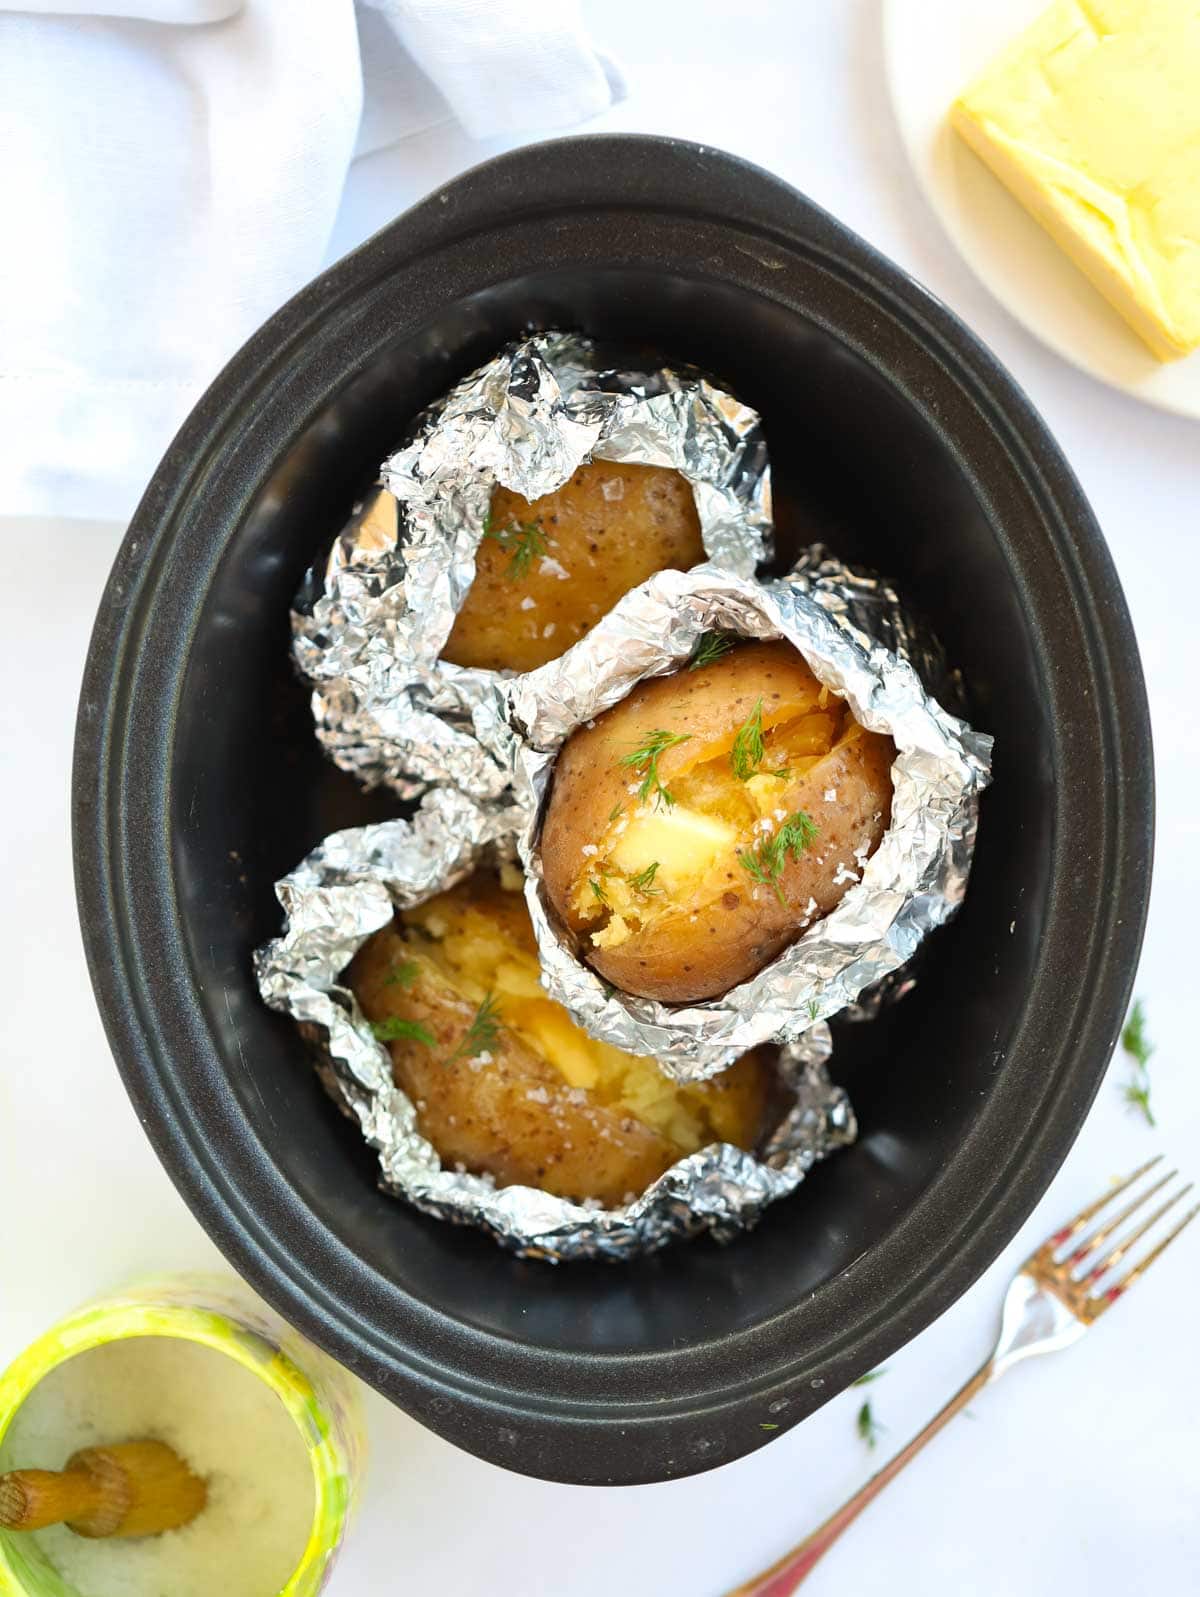 This recipe shows you how to easy it is to make slow cooker jacket potatoes